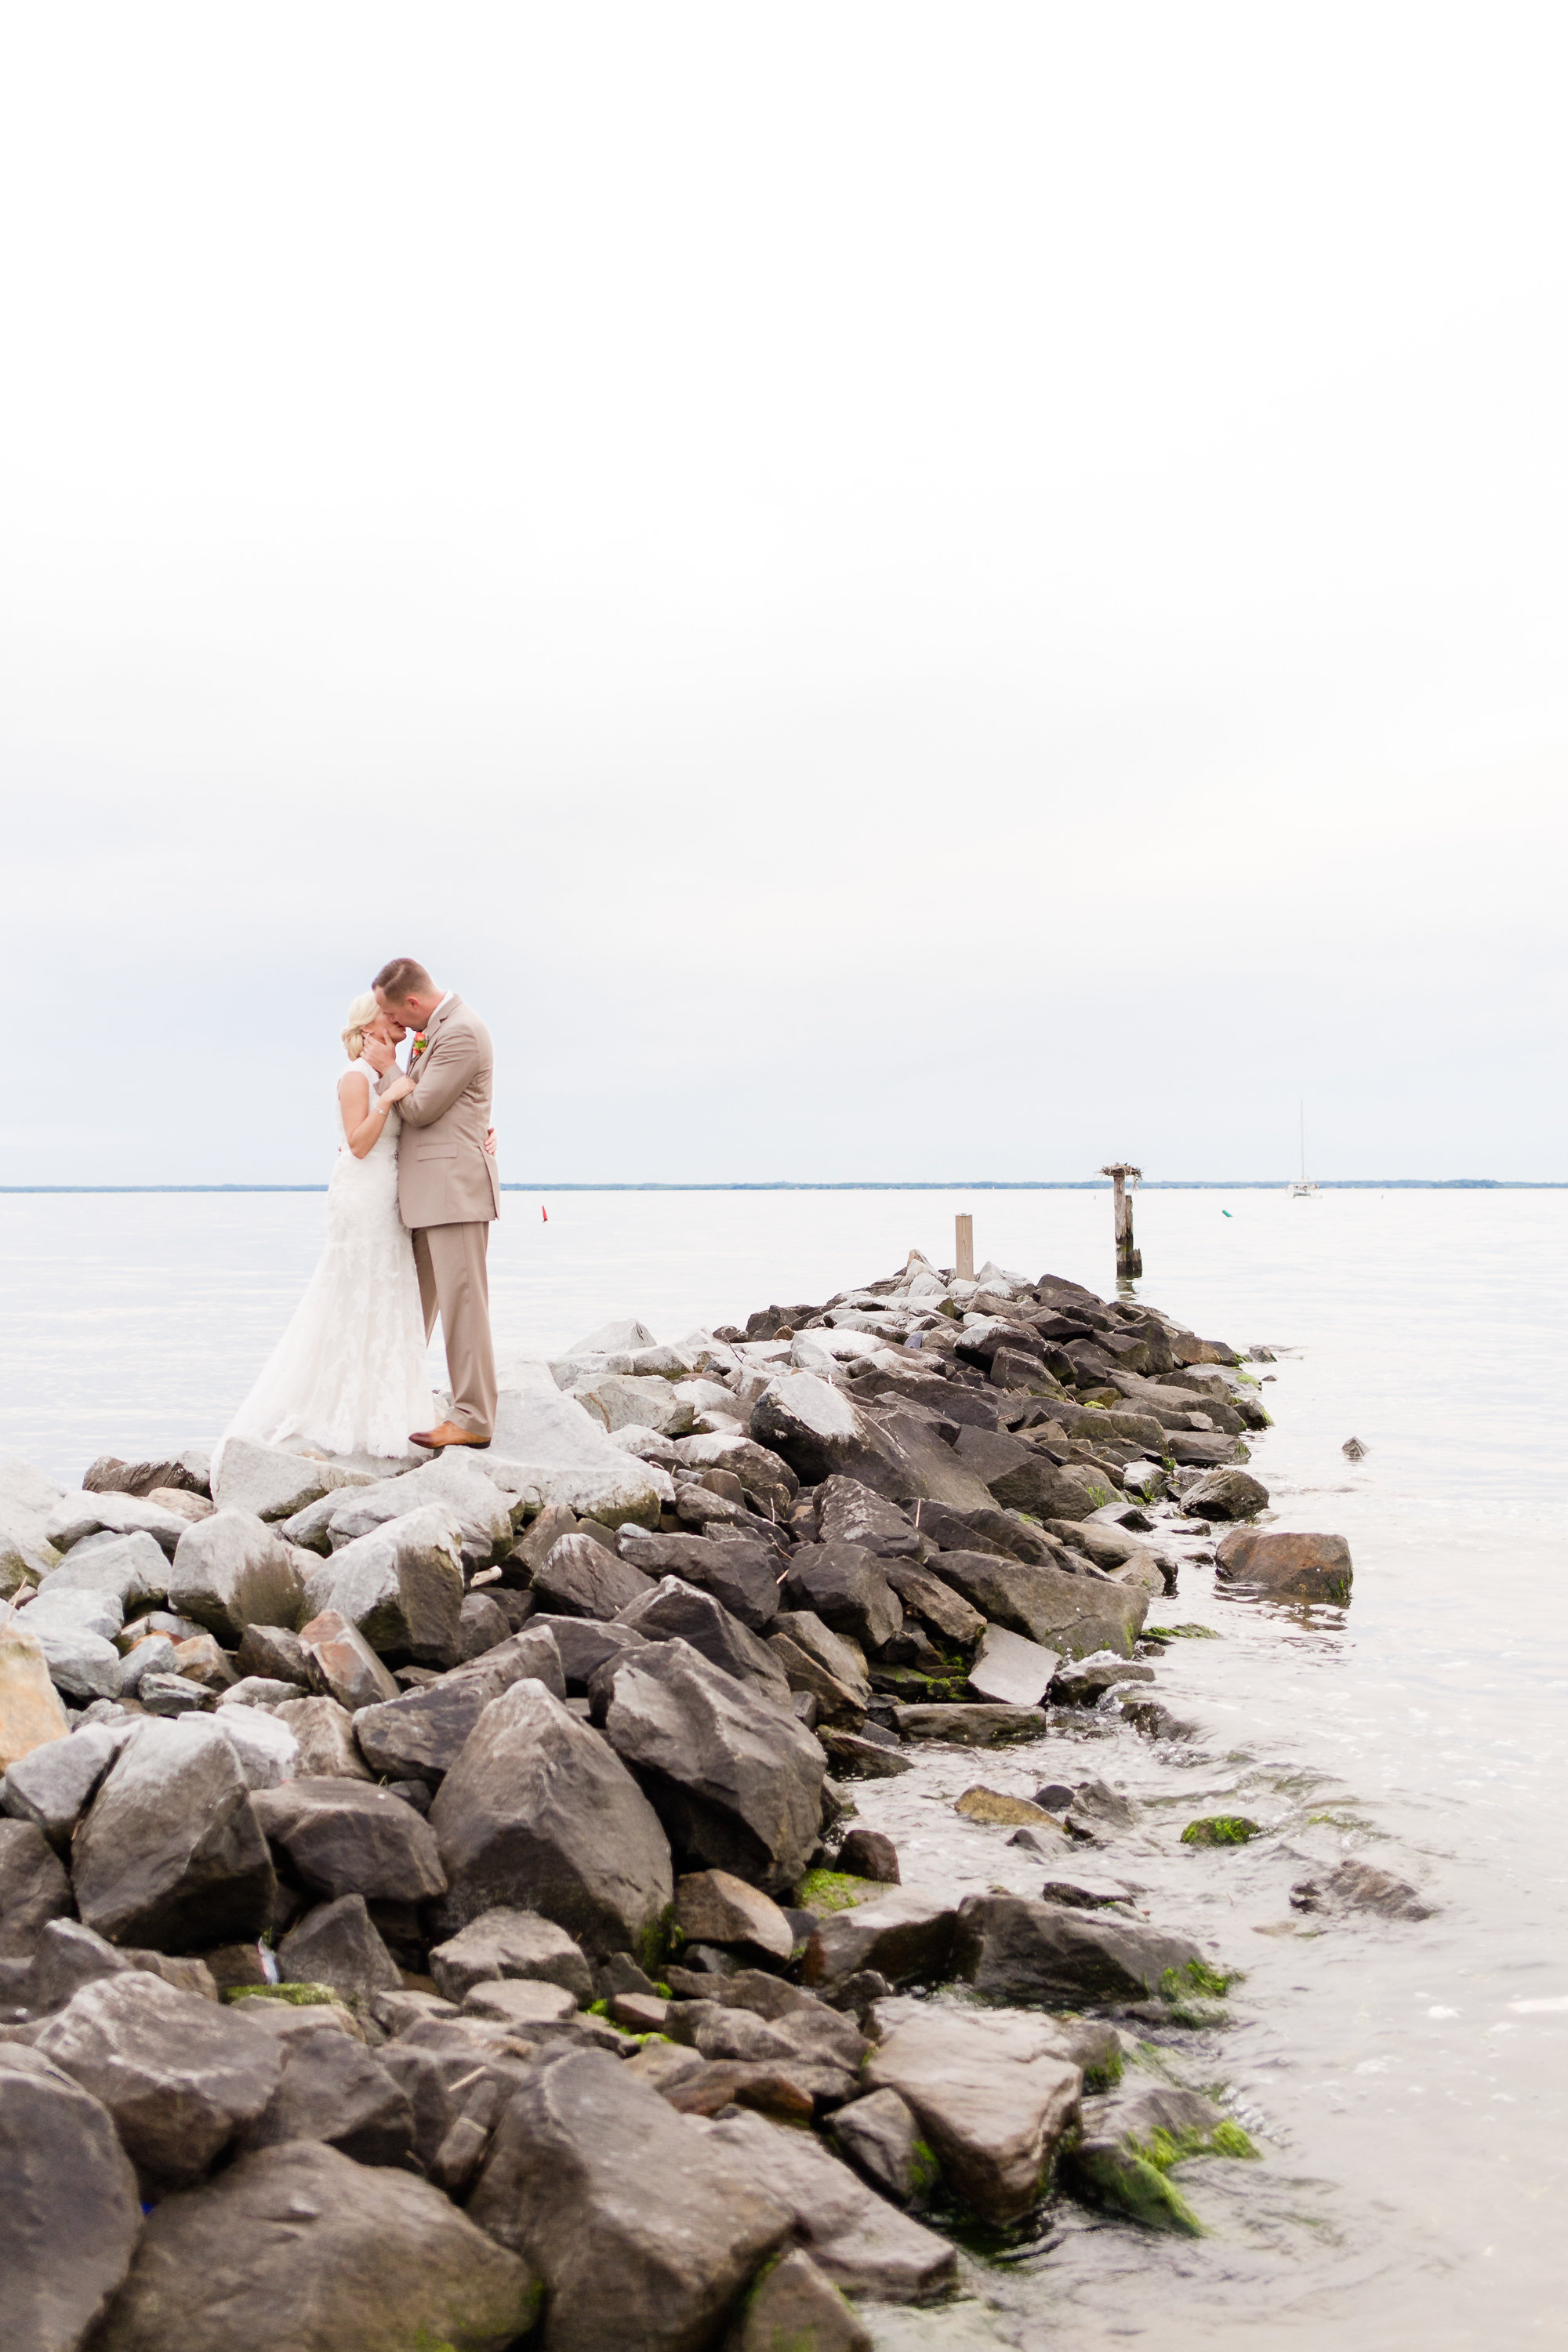 View More: http://laurenwerkheiserphotography.pass.us/vendor-gallery--pat-and-paige